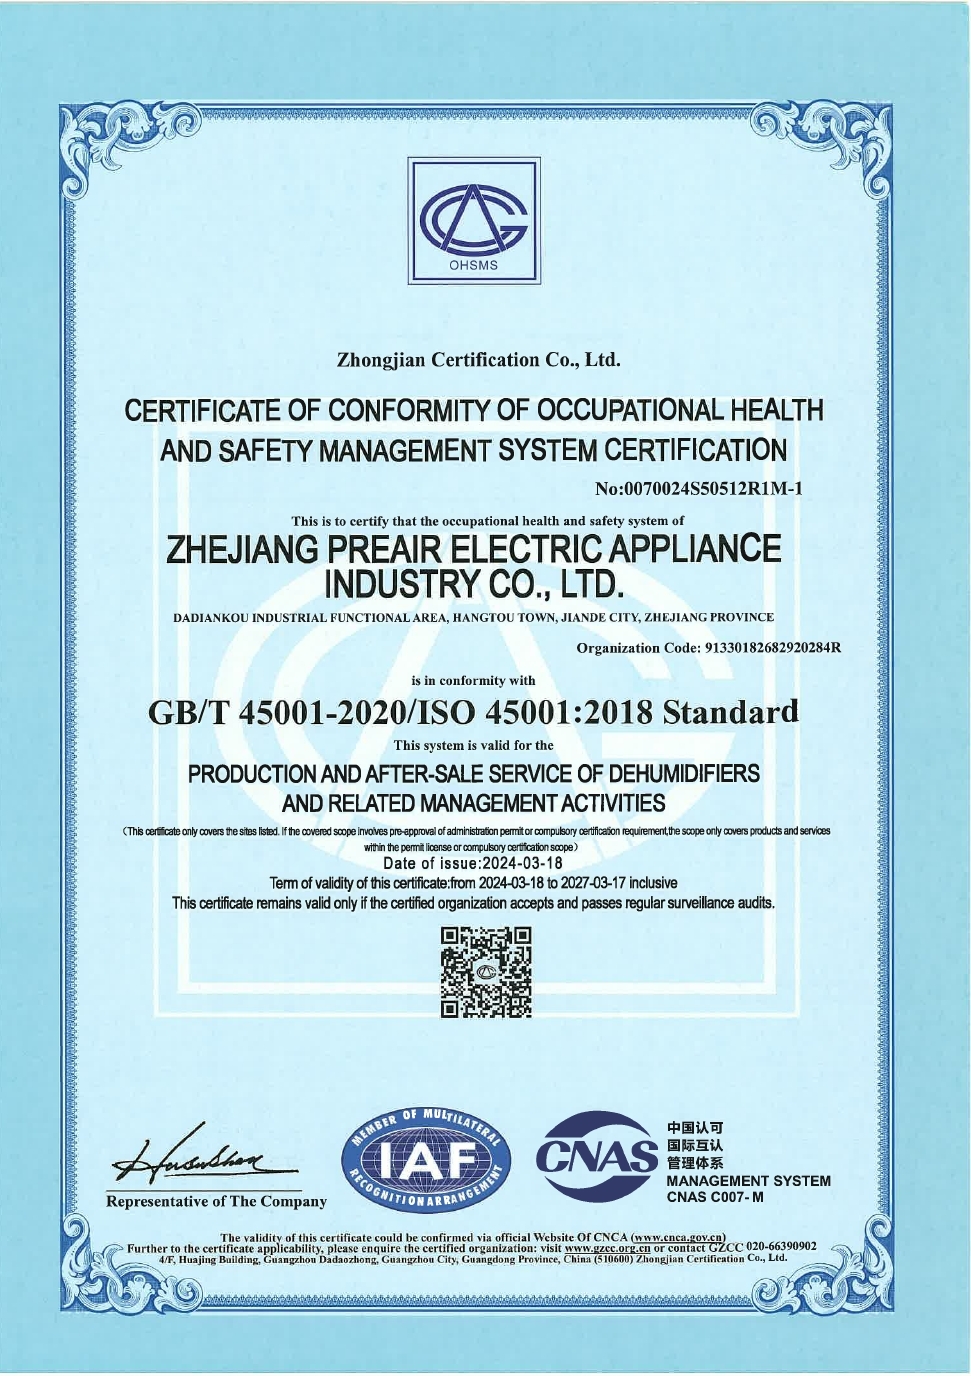 Preair Certificate of Conformity of Occupational Health and Safety Management System Certification